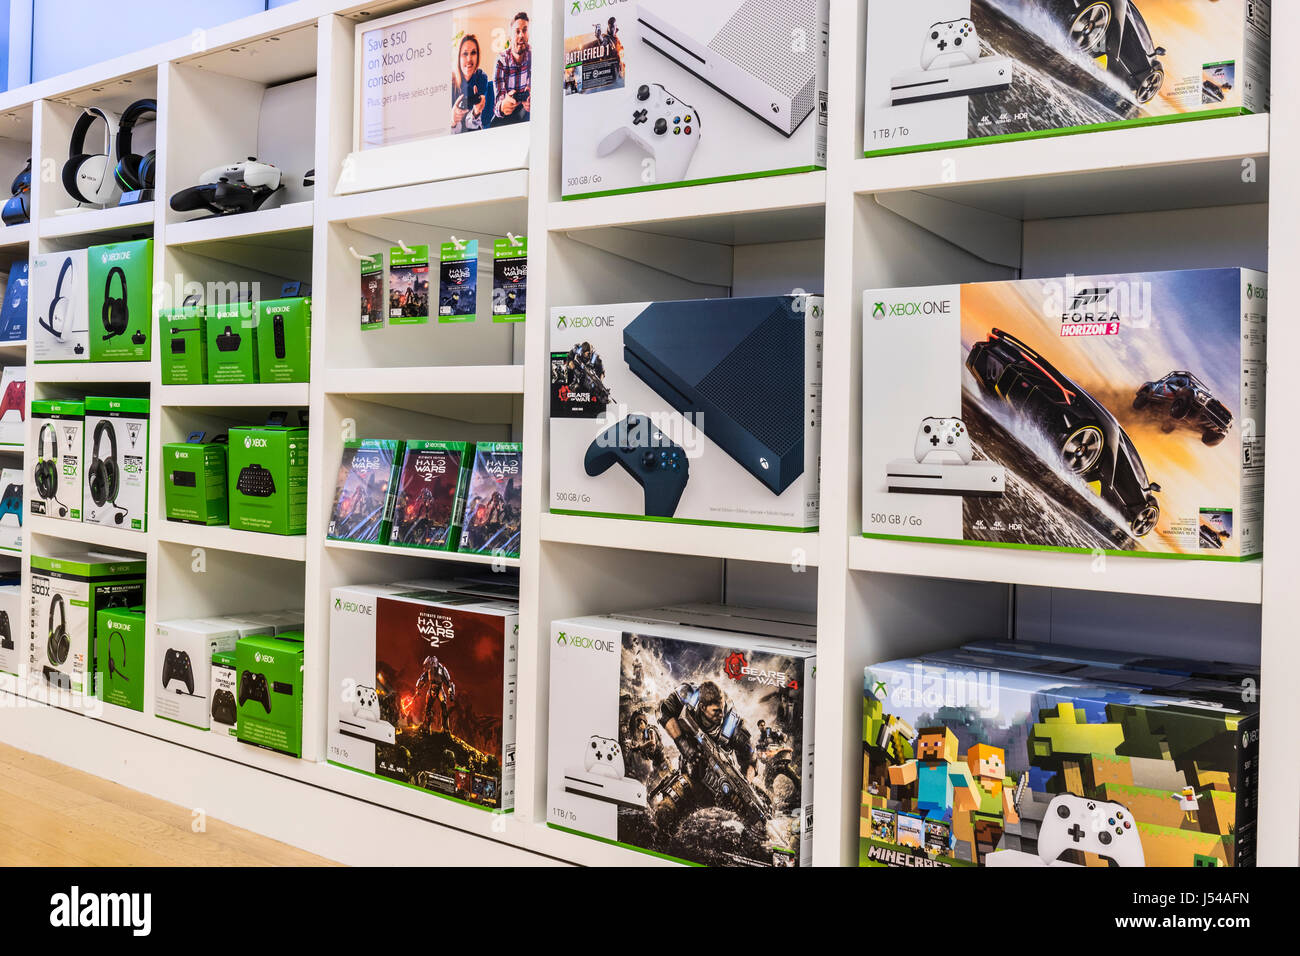 Cincinnati - Circa May 2017: XBOX One Consoles and accesories at a Microsoft Retail Technology Store VI Stock Photo